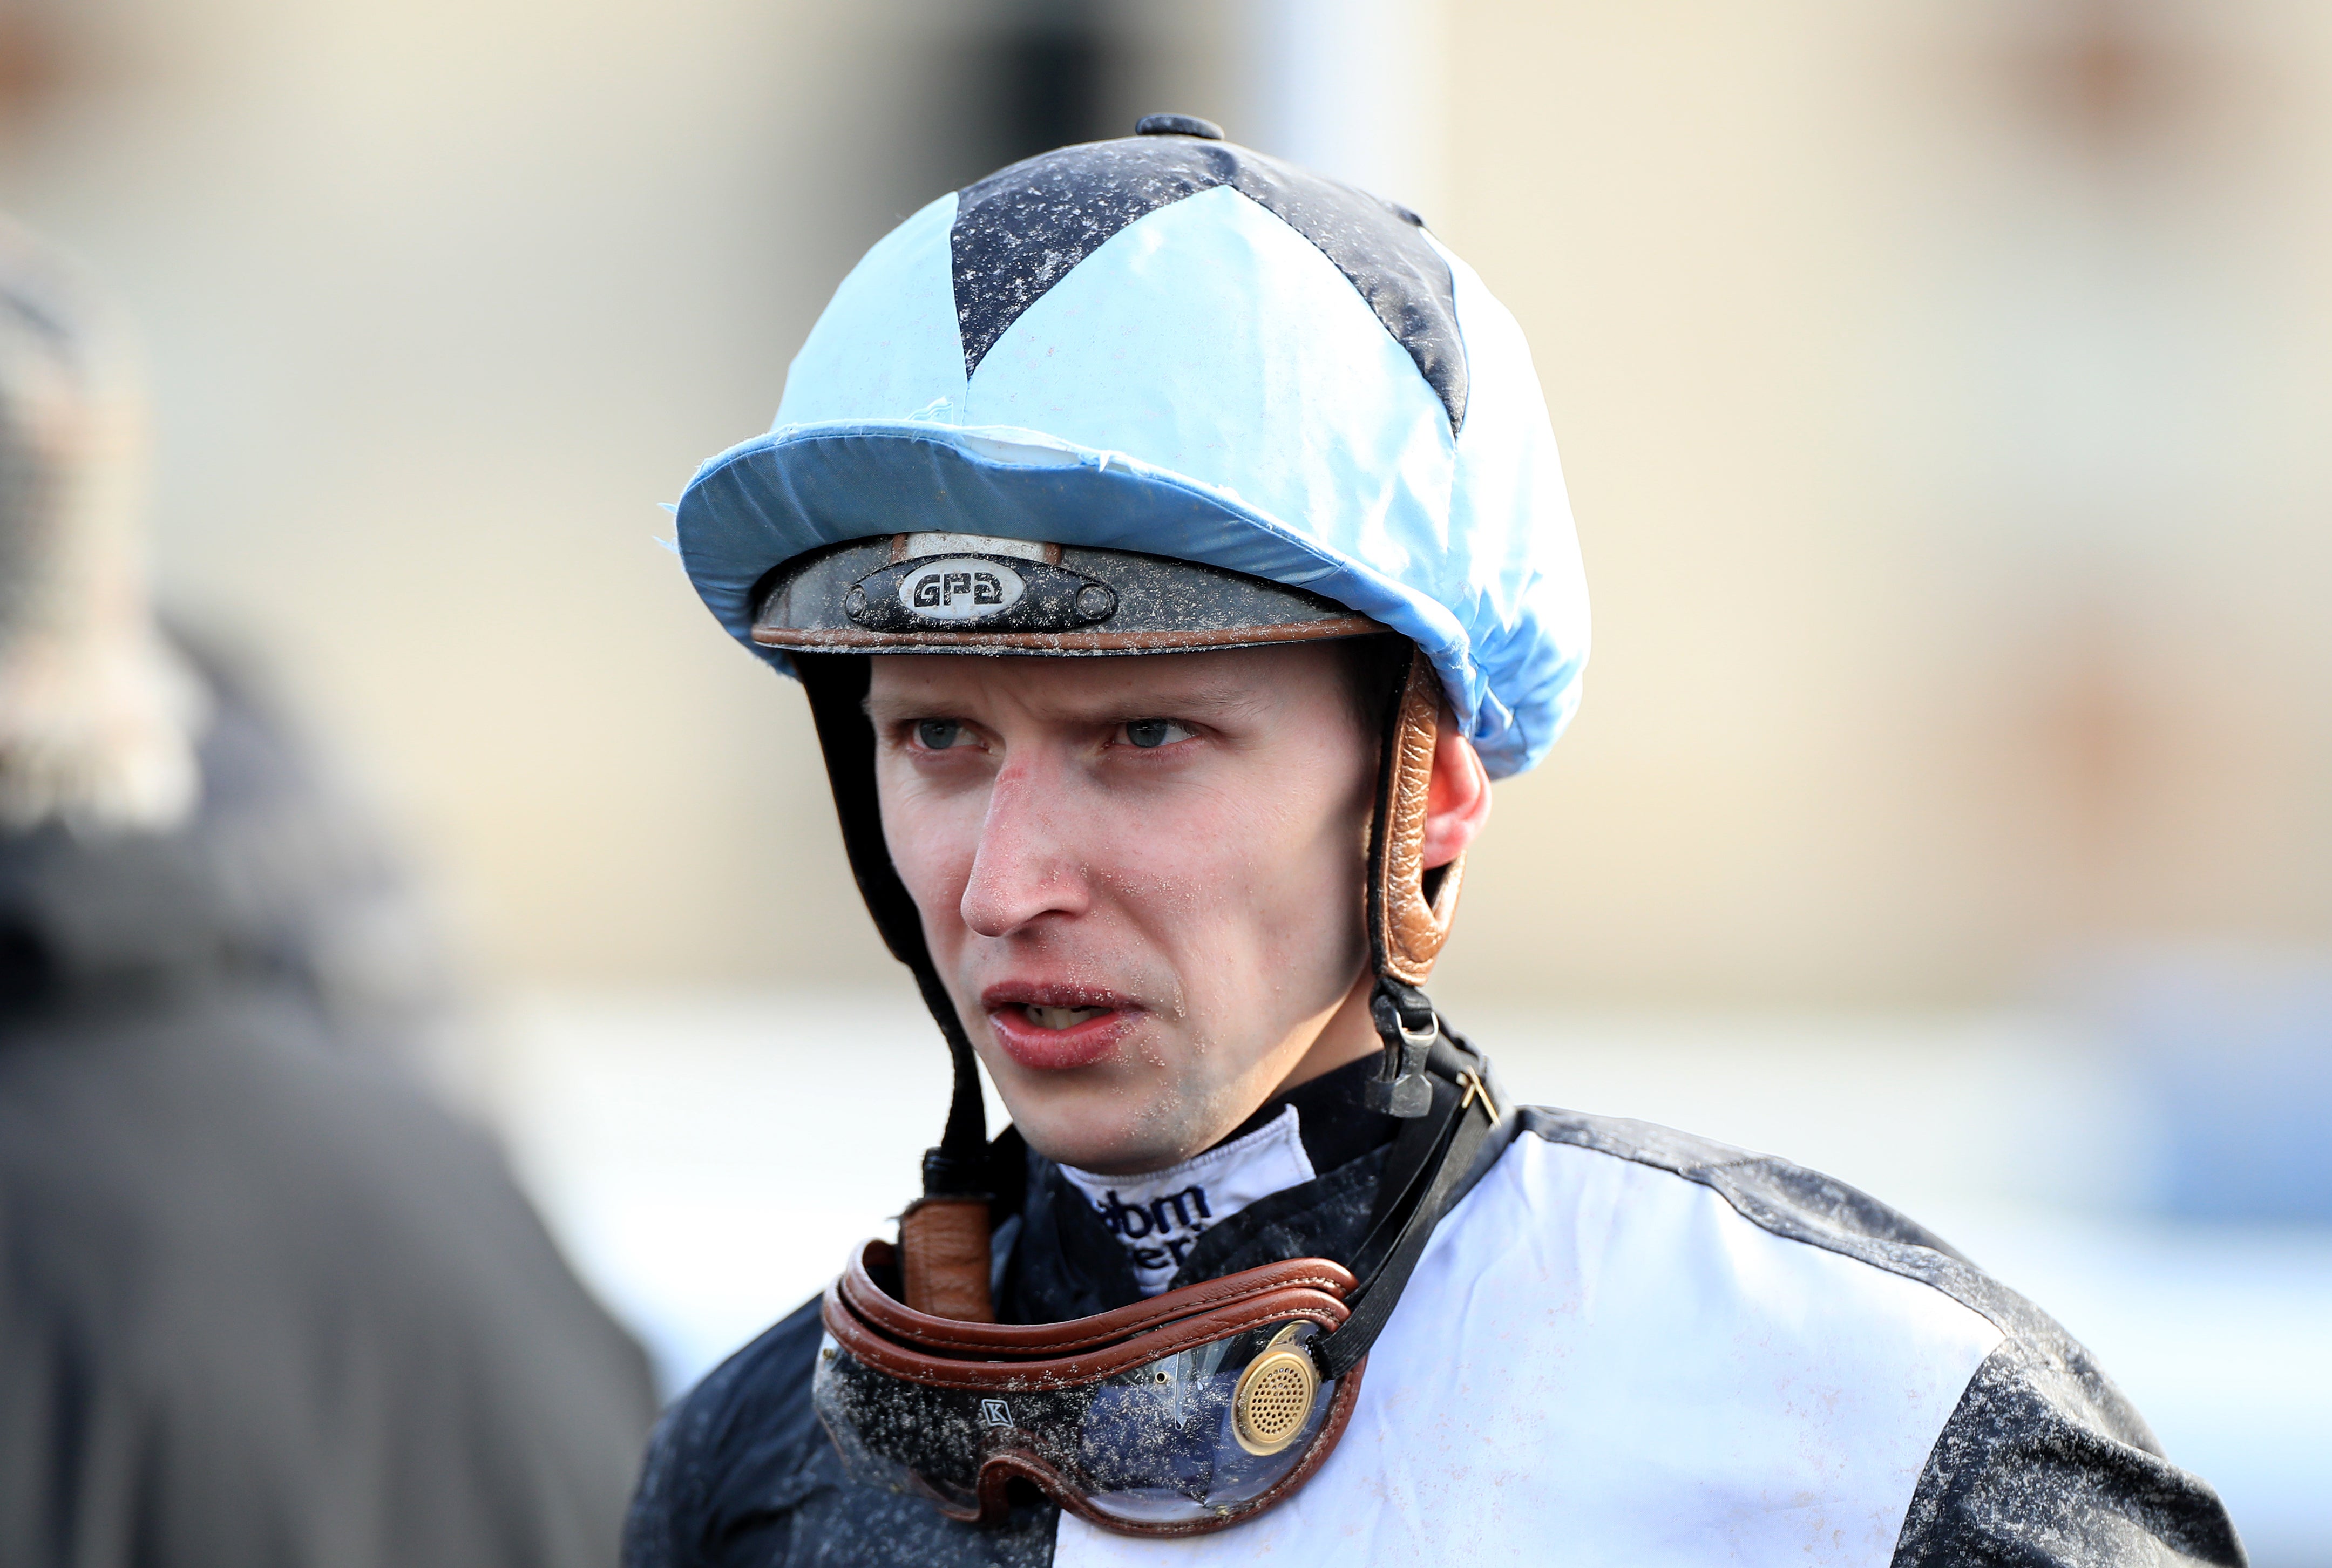 Alistair Rawlinson suffered broken bones in a fall at Windso